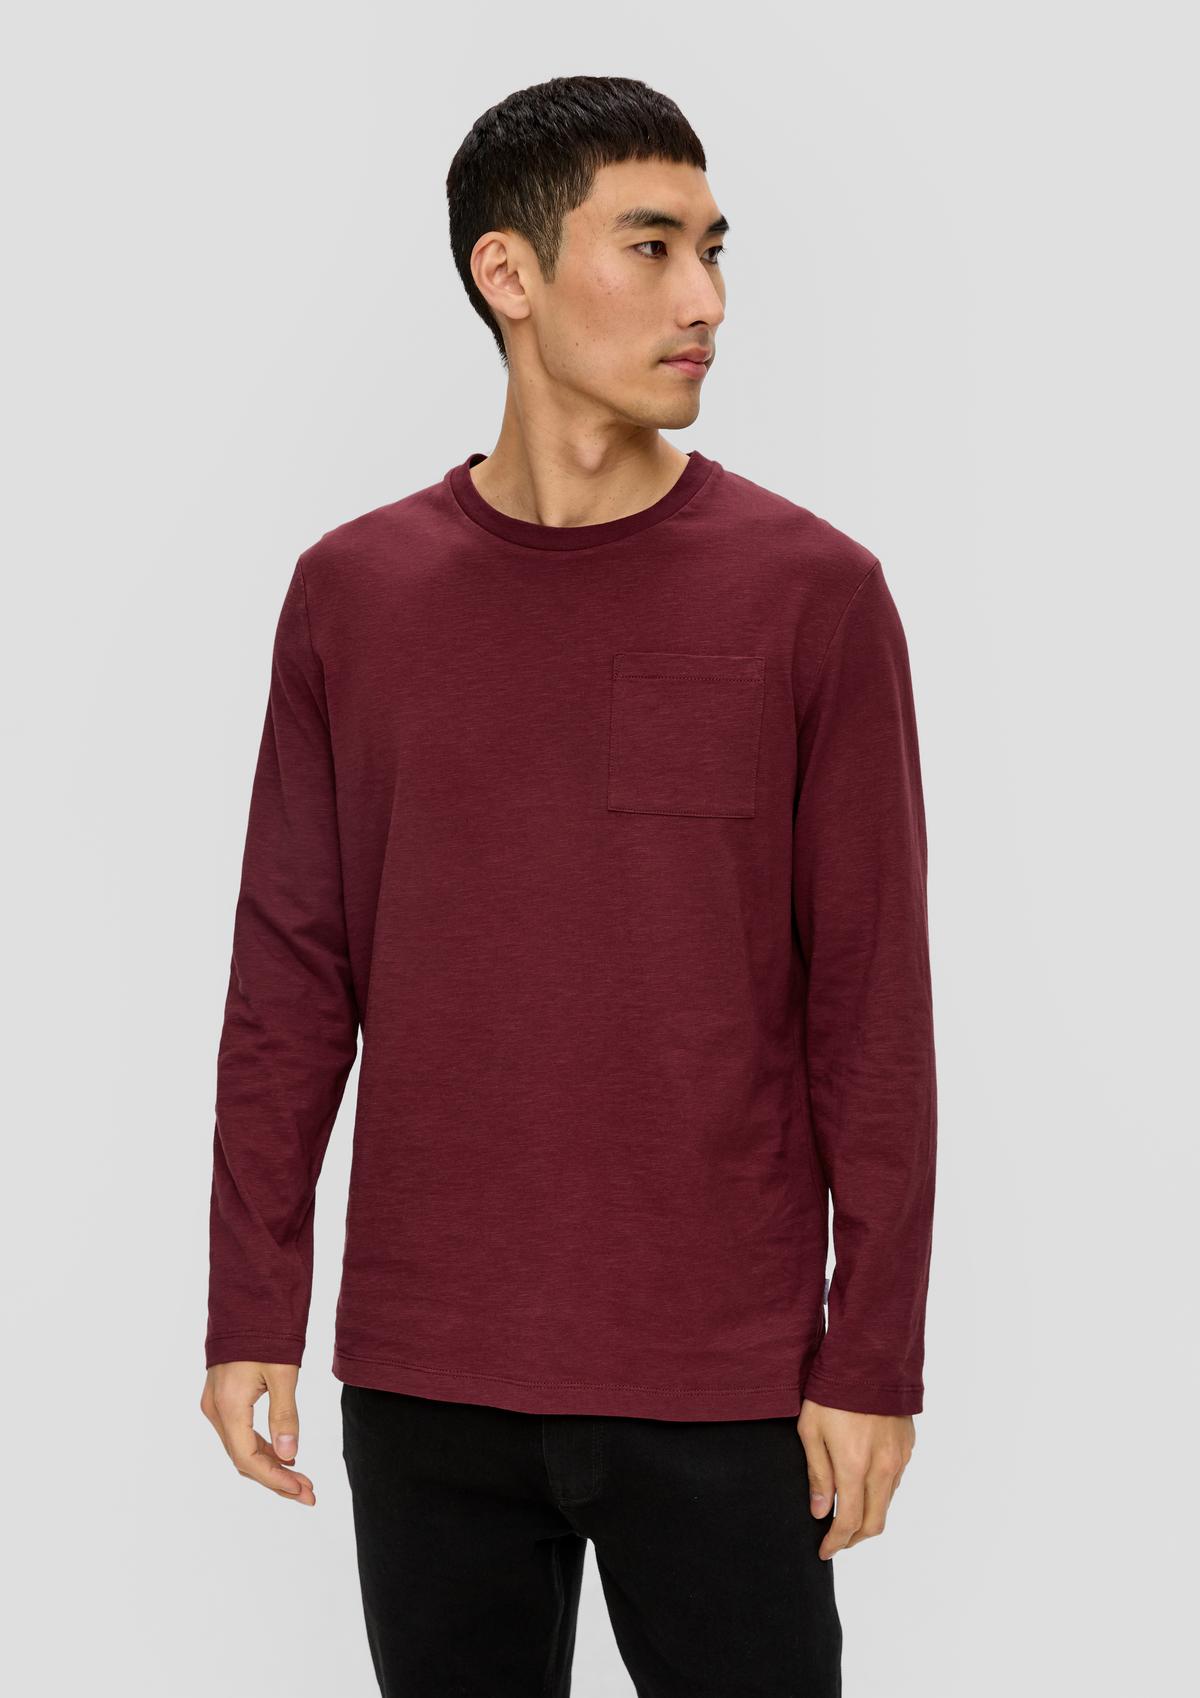 s.Oliver Long sleeve top with a slub yarn texture